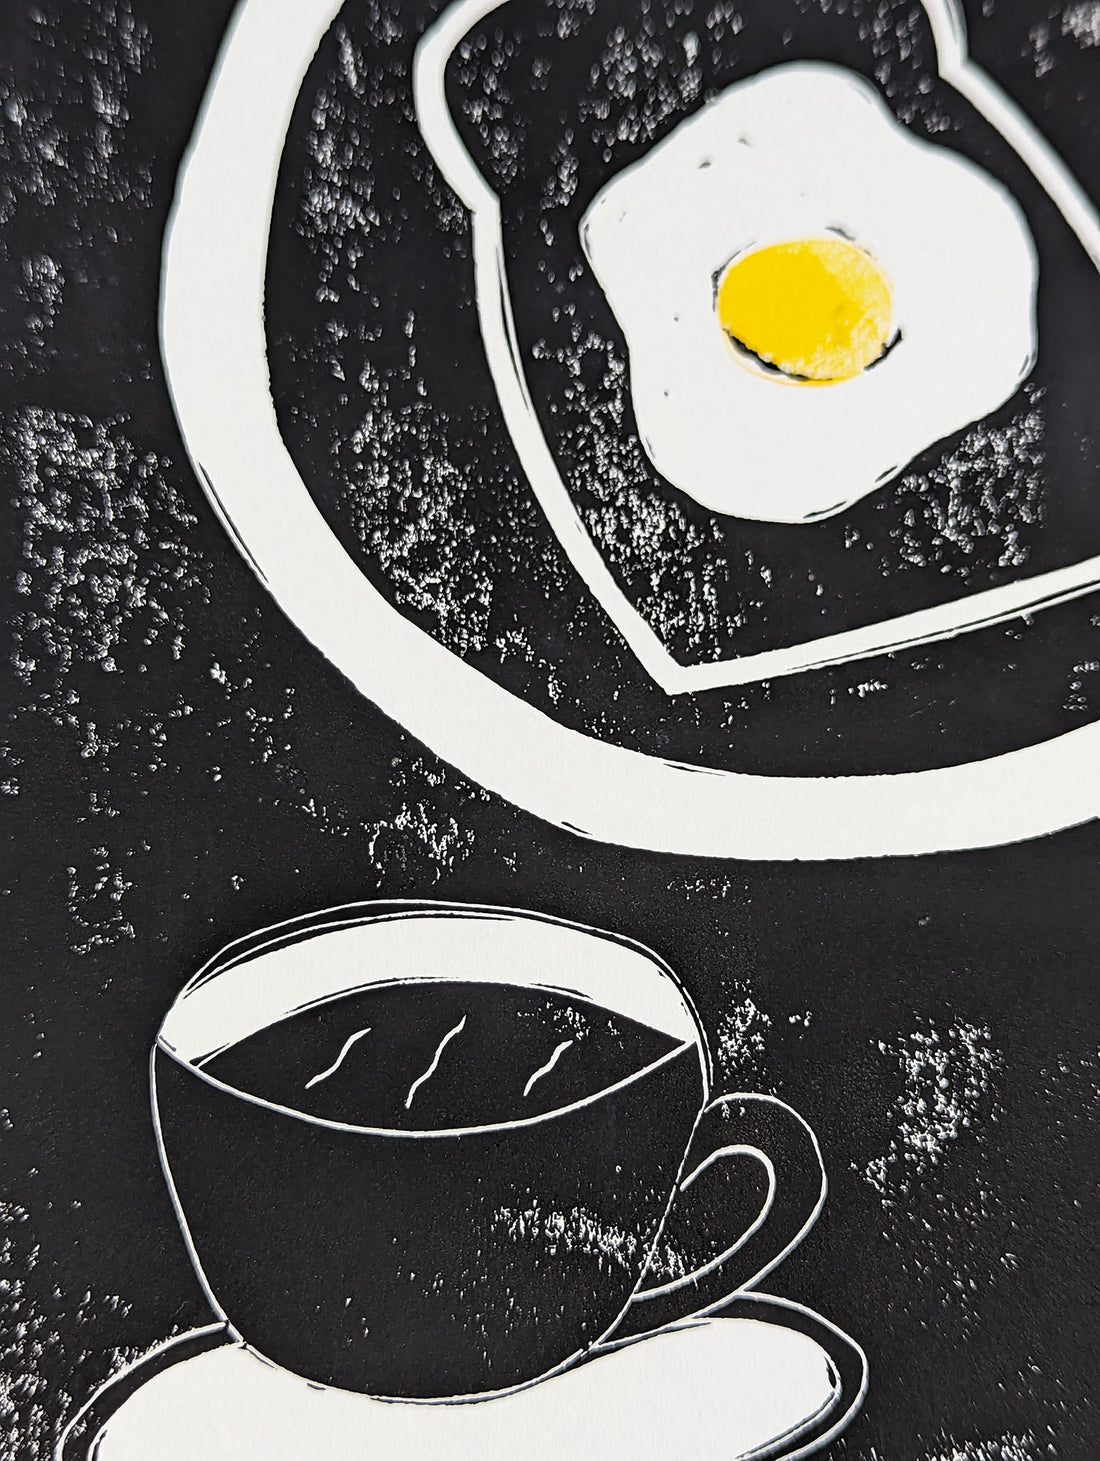 Art School x Ellie Edwards x Morty and Bob's Kensal Rise collaboration linocut series, A cup of Joe and Eggs breakfast scene detail